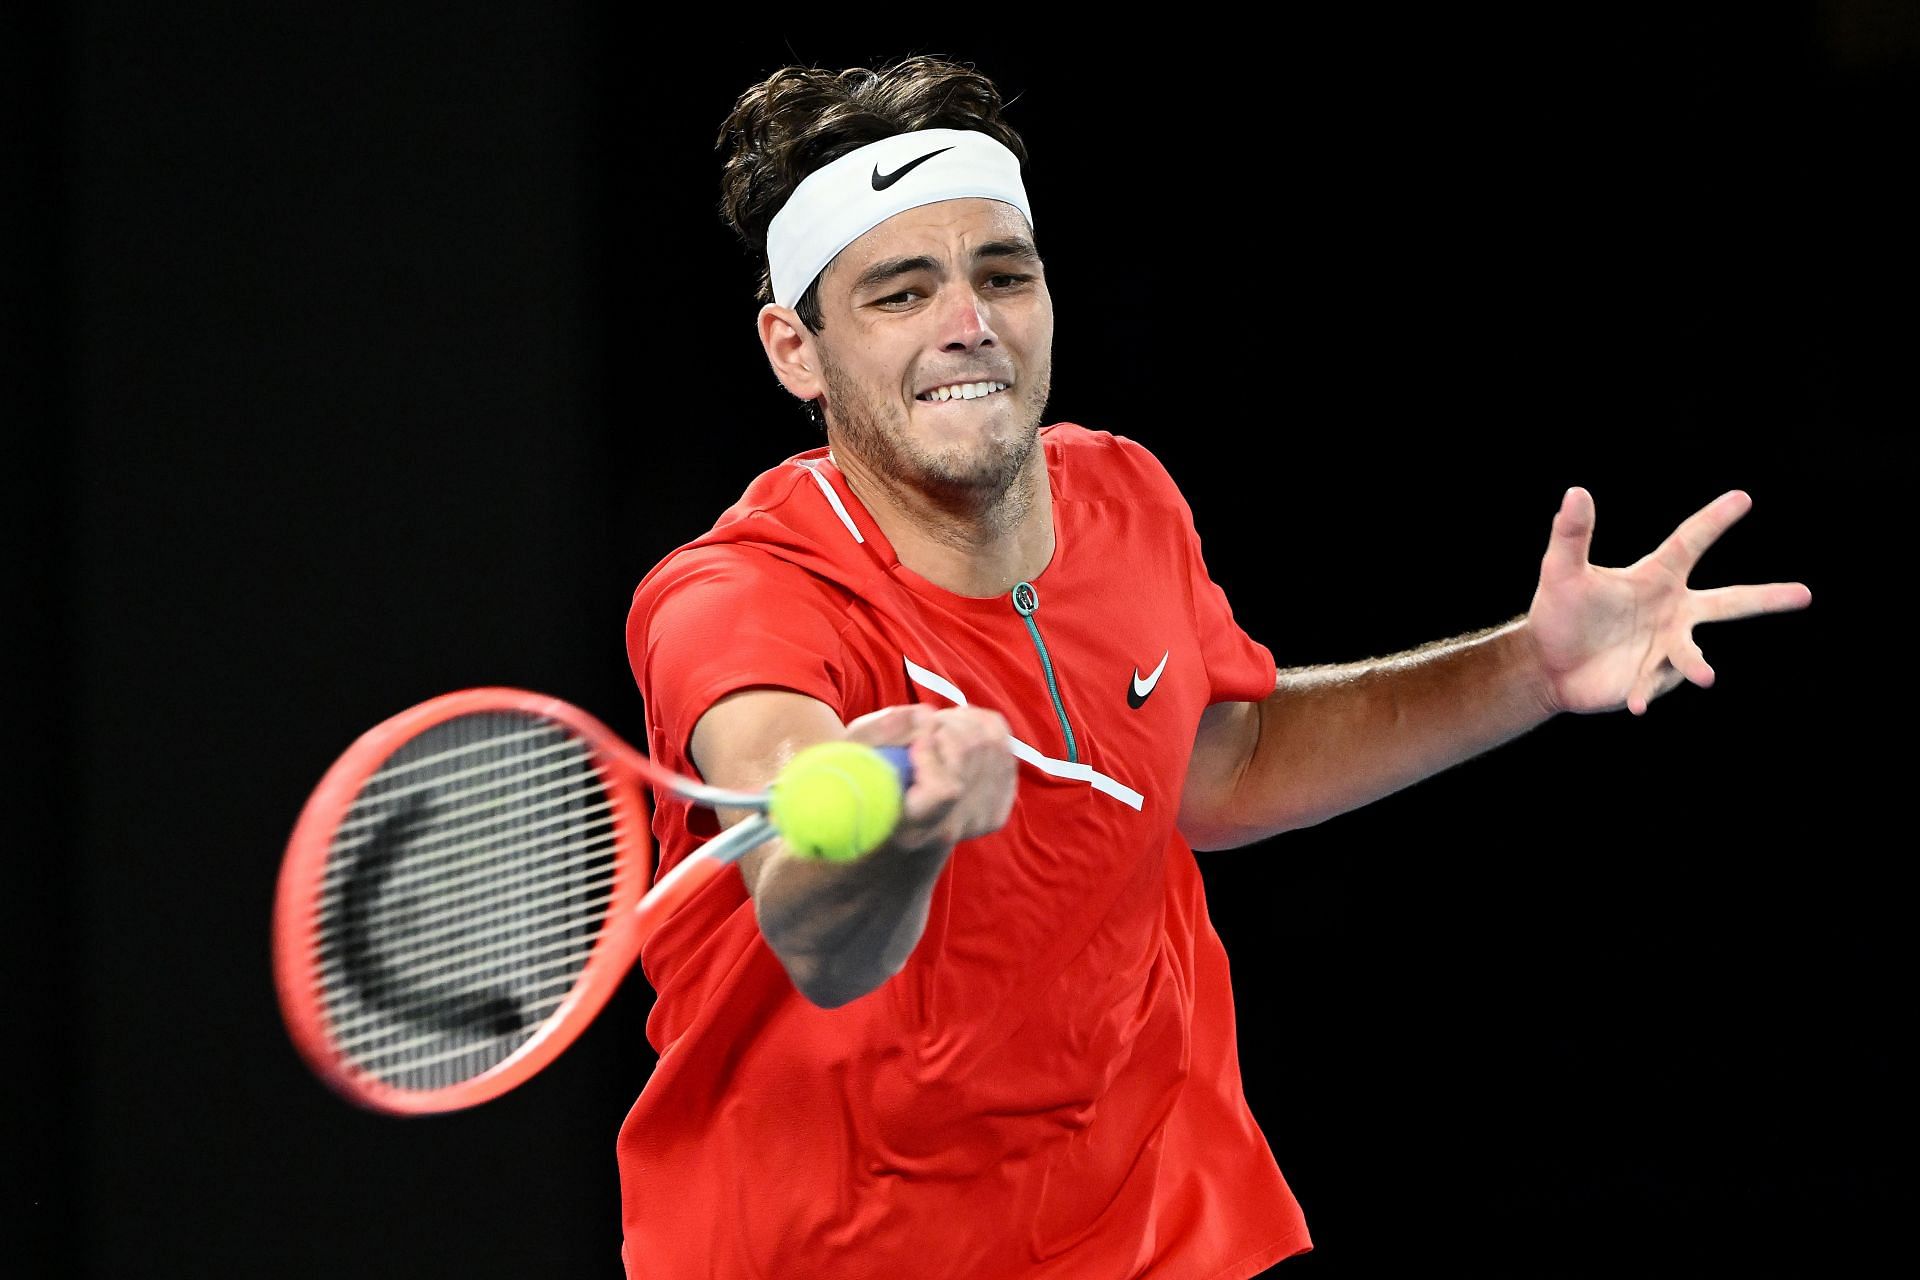 Taylor Fritz in action at 2022 Australian Open.